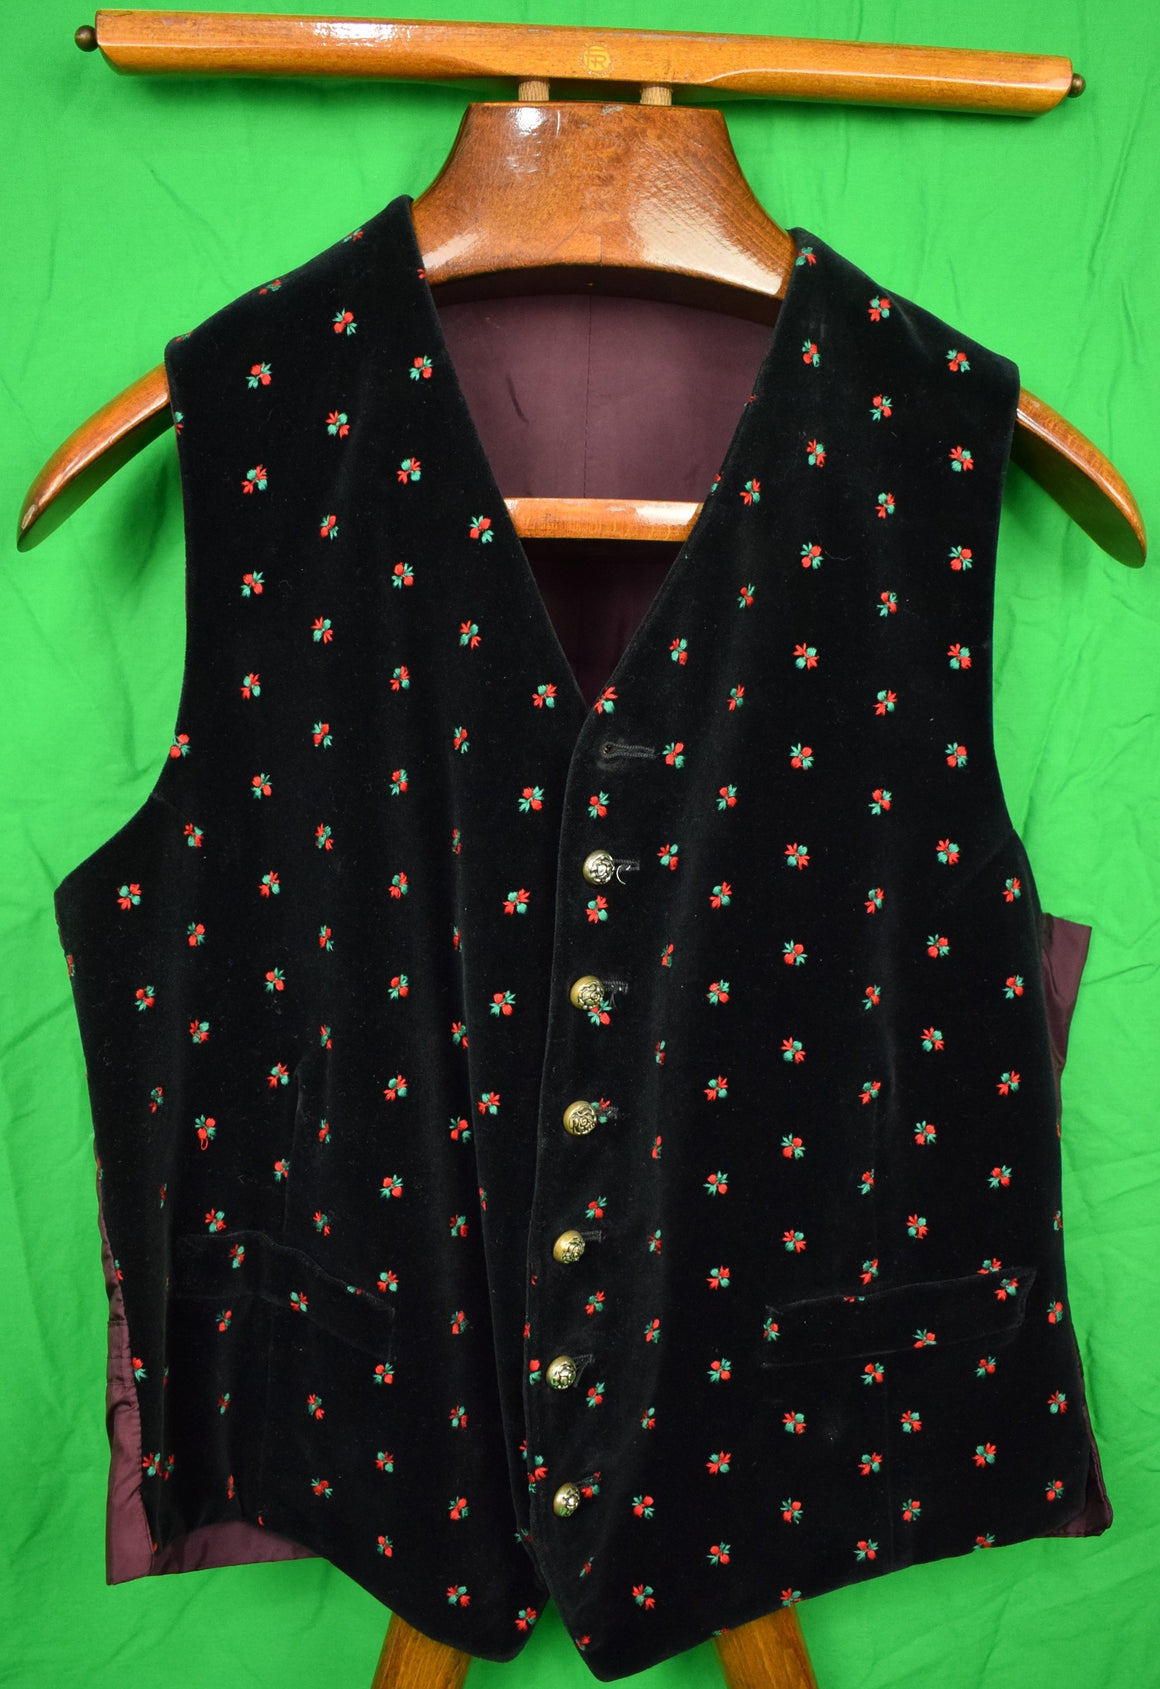 "Black Velvet (7) Button Waistcoat w/ Embroidered Red & Green Holly" Sz: 38 (SOLD)